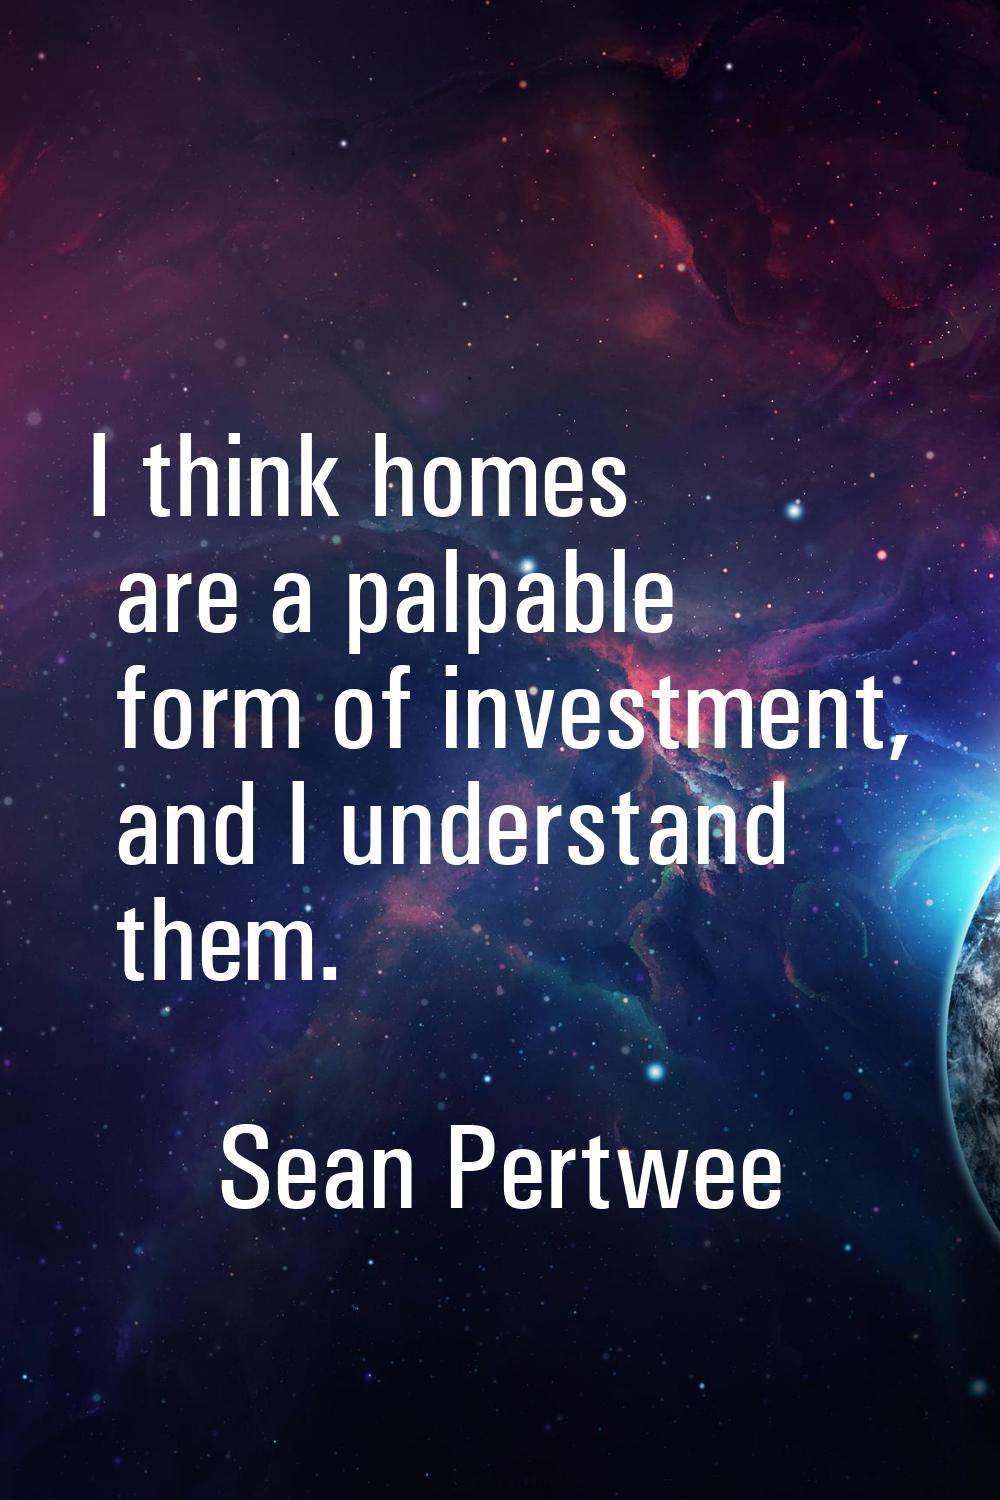 I think homes are a palpable form of investment, and I understand them.